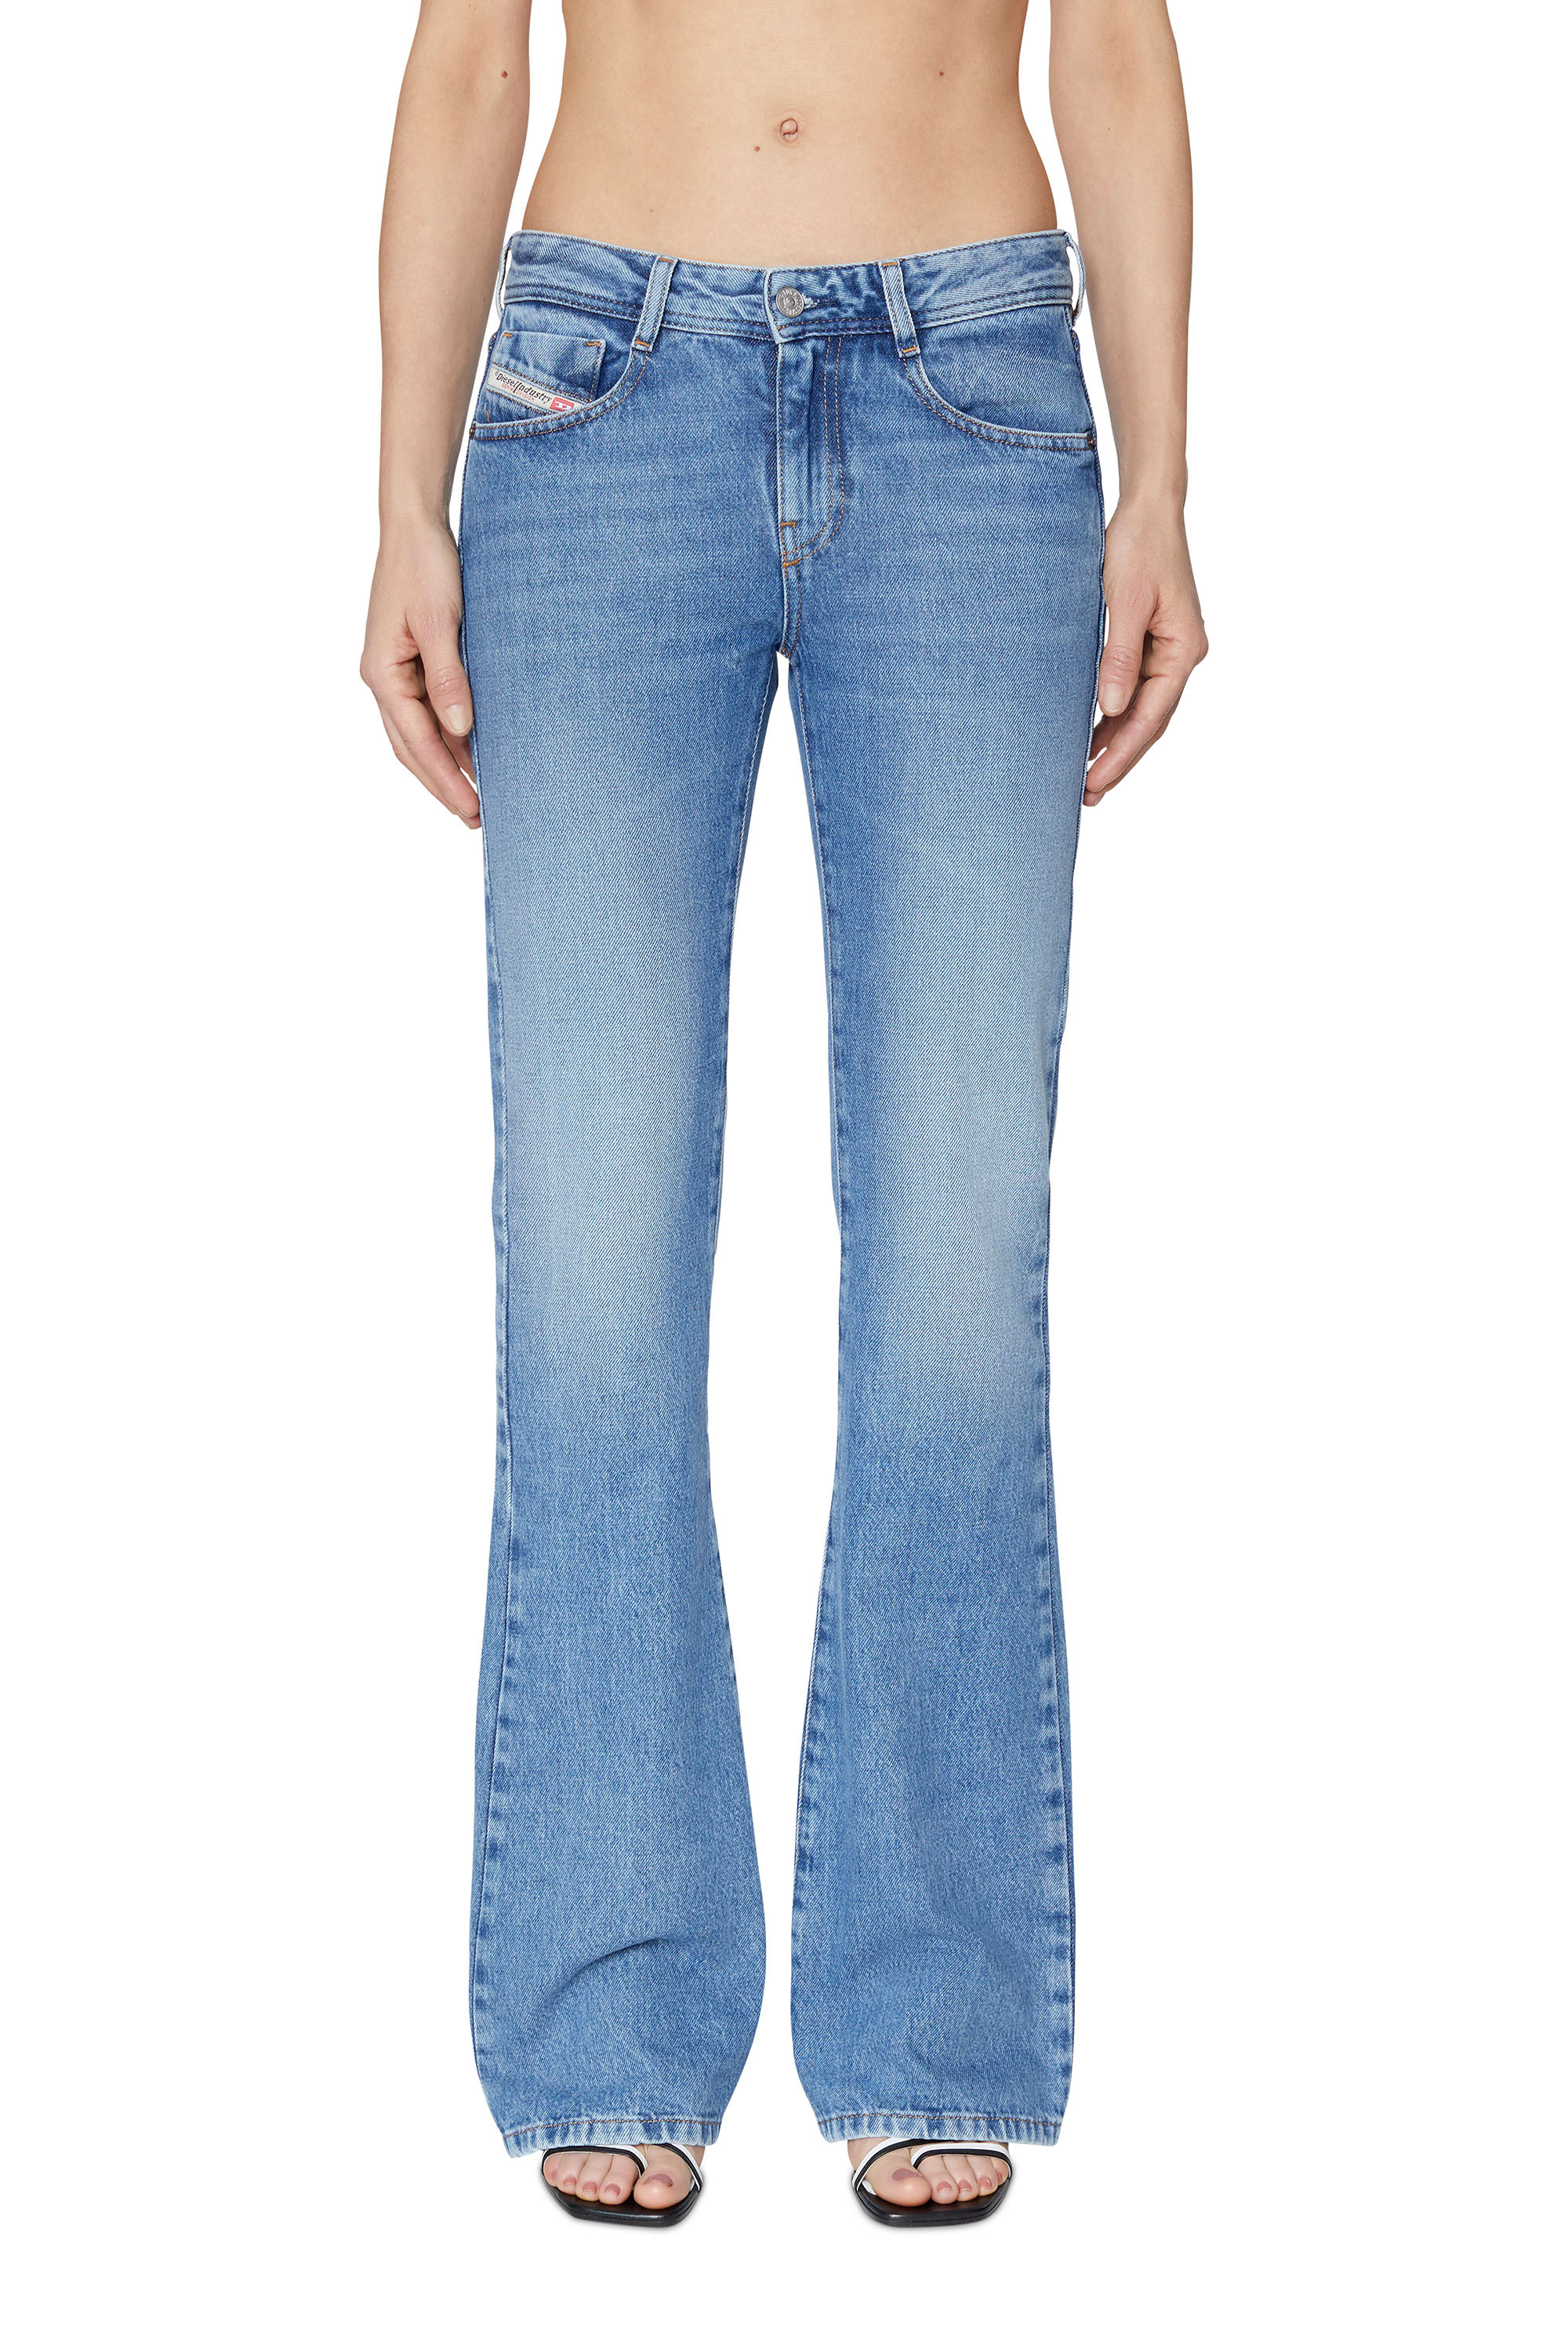 1969 D-EBBEY 09C16 Bootcut and Flare Jeans,  - ジーンズ